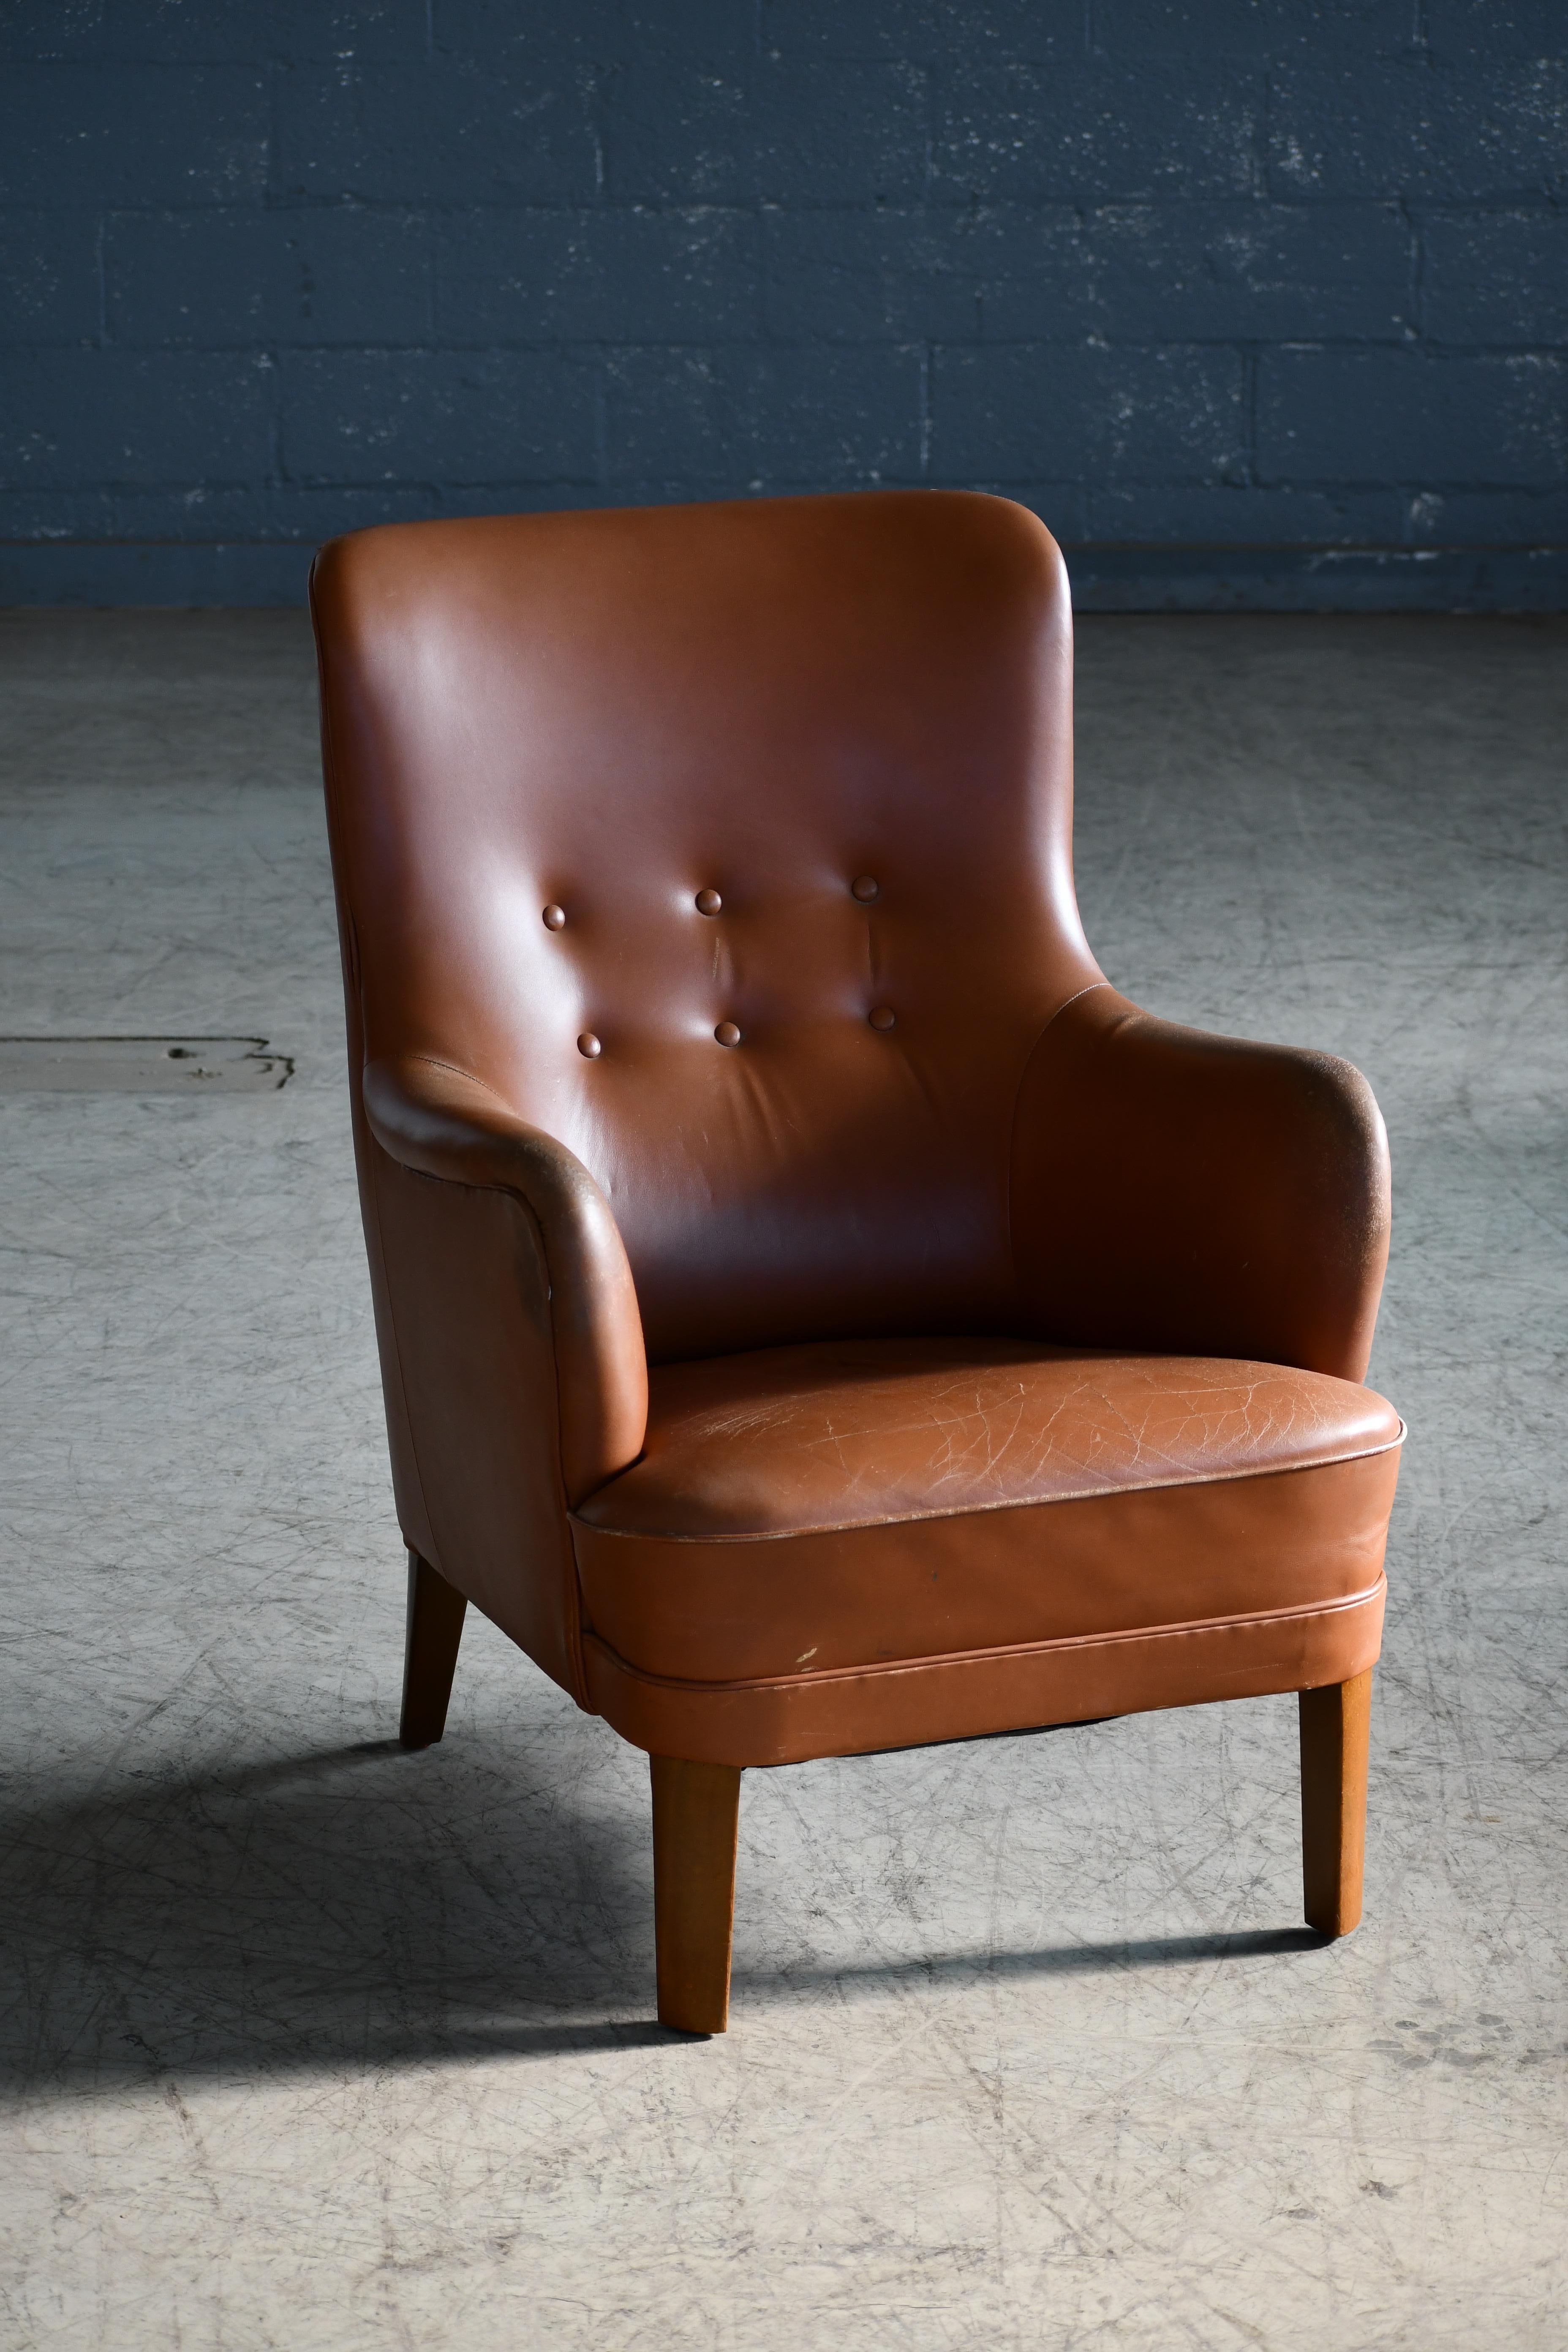 Charming and very elegant Classic Danish lounge chair by Peter Hvidt and Orla Molgaard-Nielsen. Simple yet very refined design lines and very comfortable to sit in even for a tall person. Beechwood frame and coil springs in the seat. Original brown